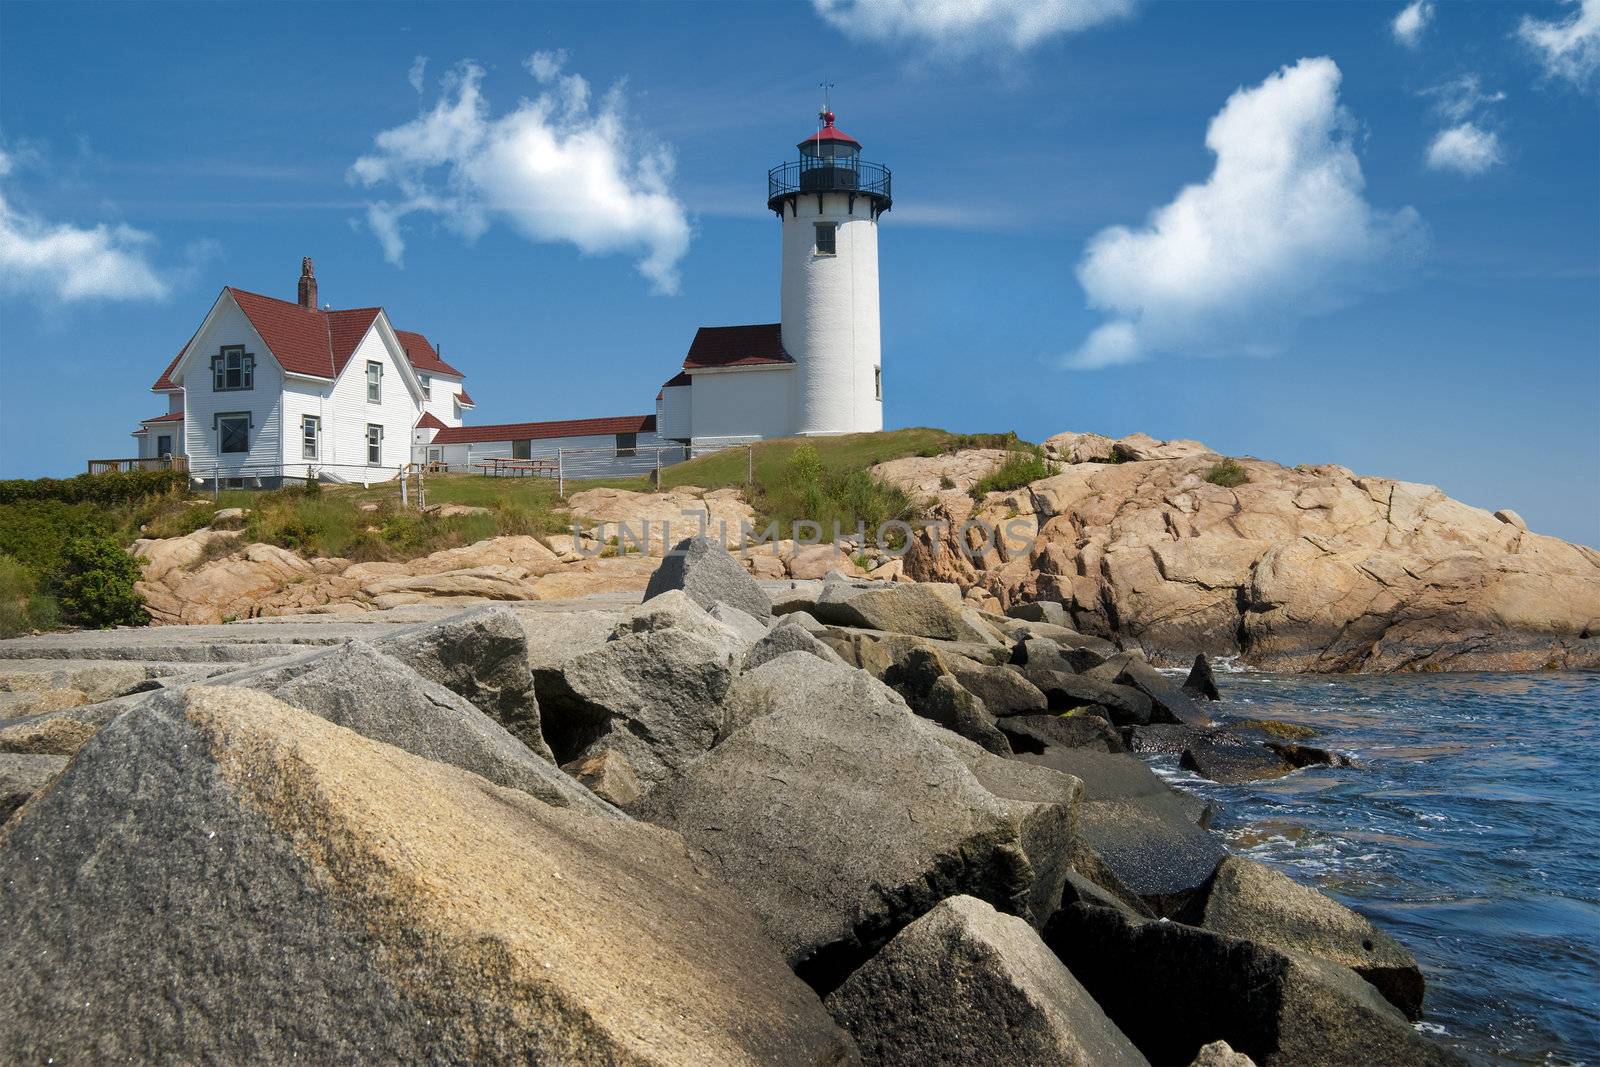 Eastern point lighthouse located off the coast of Gloucester, Massachusetts, USA